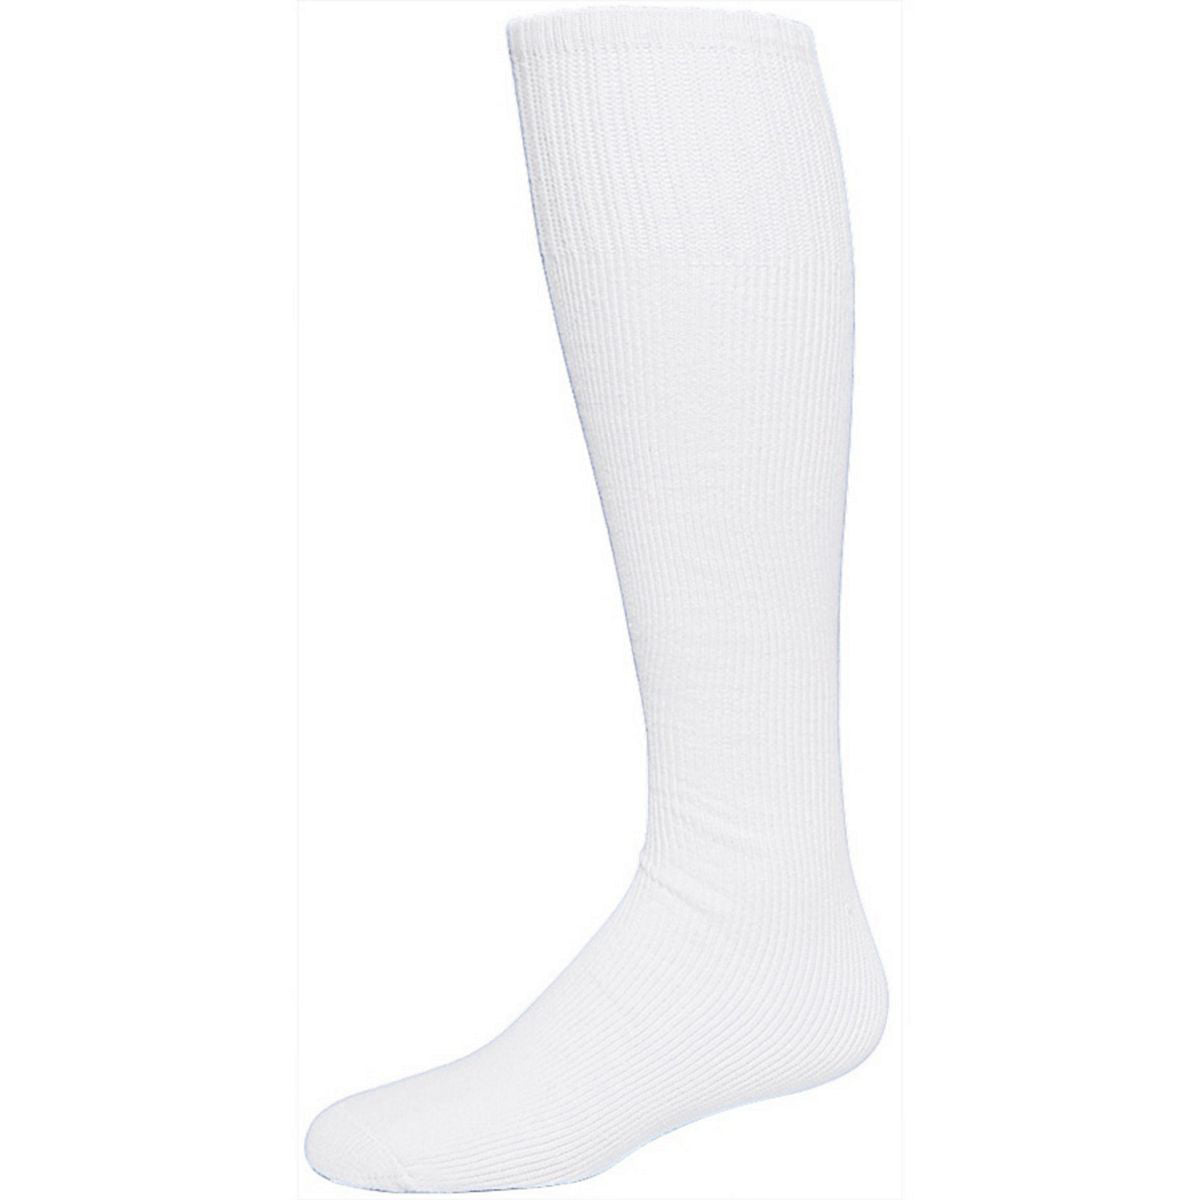 Augusta Sportswear Game Socks in White  -Part of the Accessories, Augusta-Products, Accessories-Socks product lines at KanaleyCreations.com